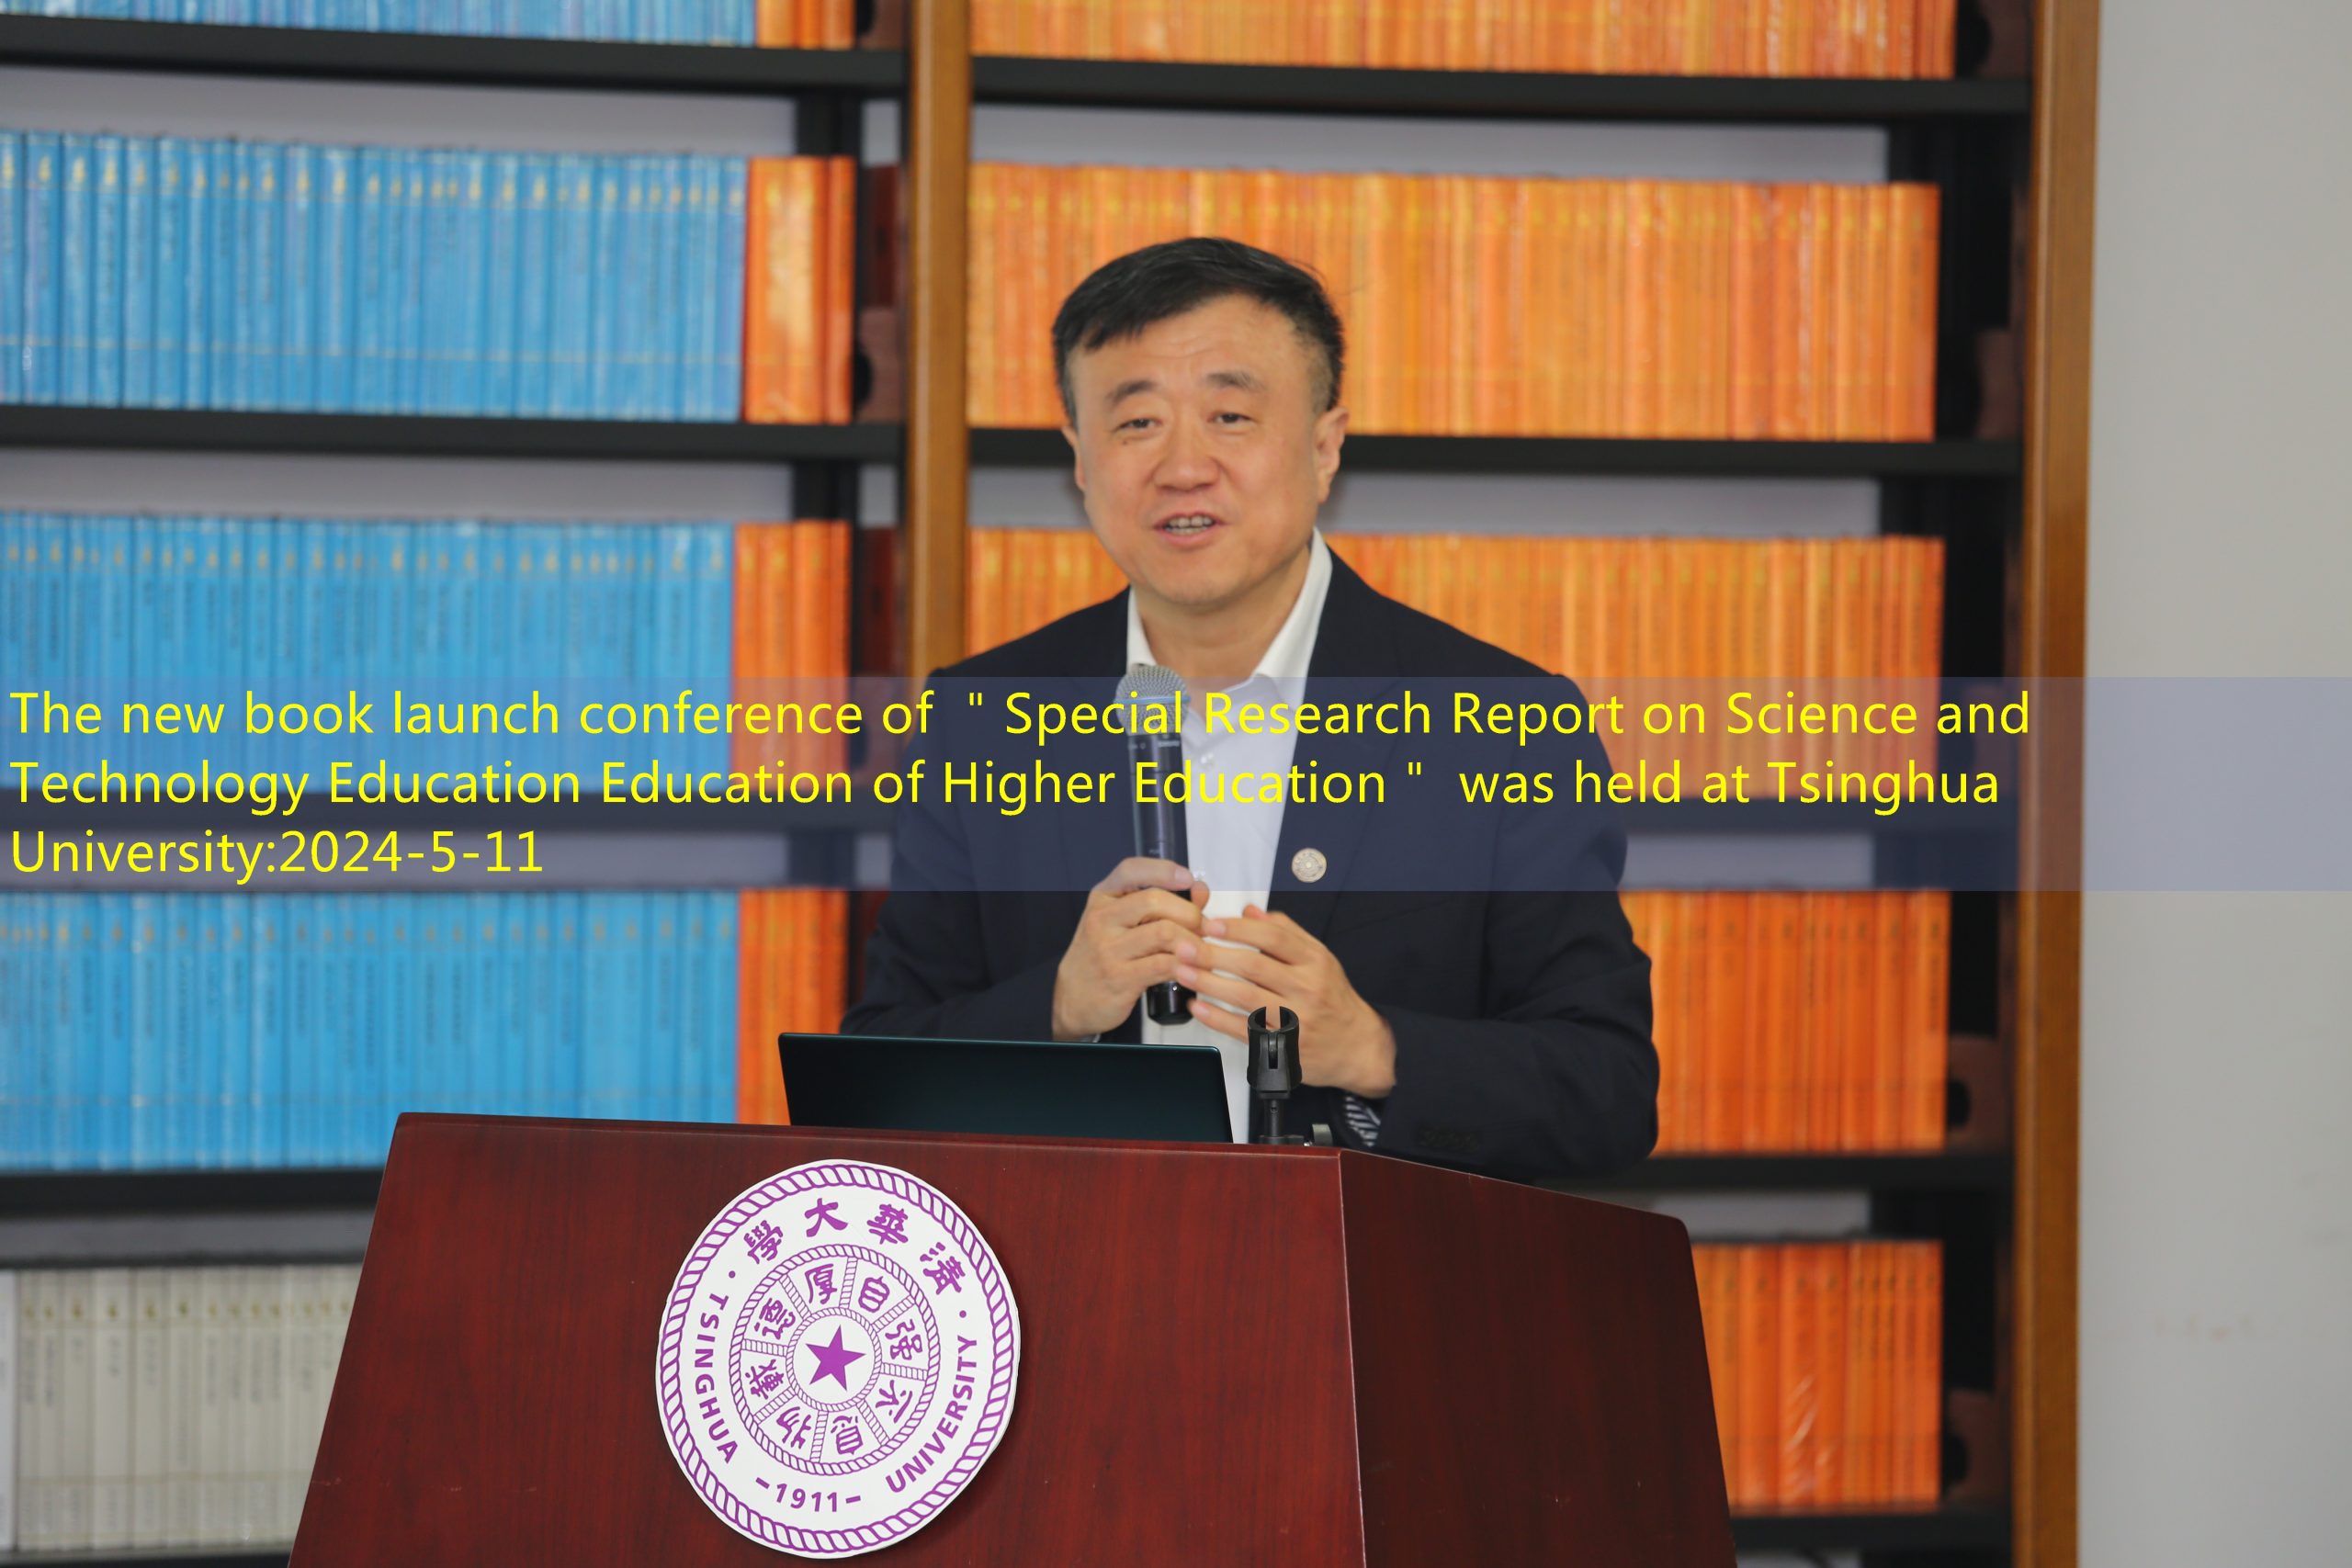 The new book launch conference of ＂Special Research Report on Science and Technology Education Education of Higher Education＂ was held at Tsinghua University